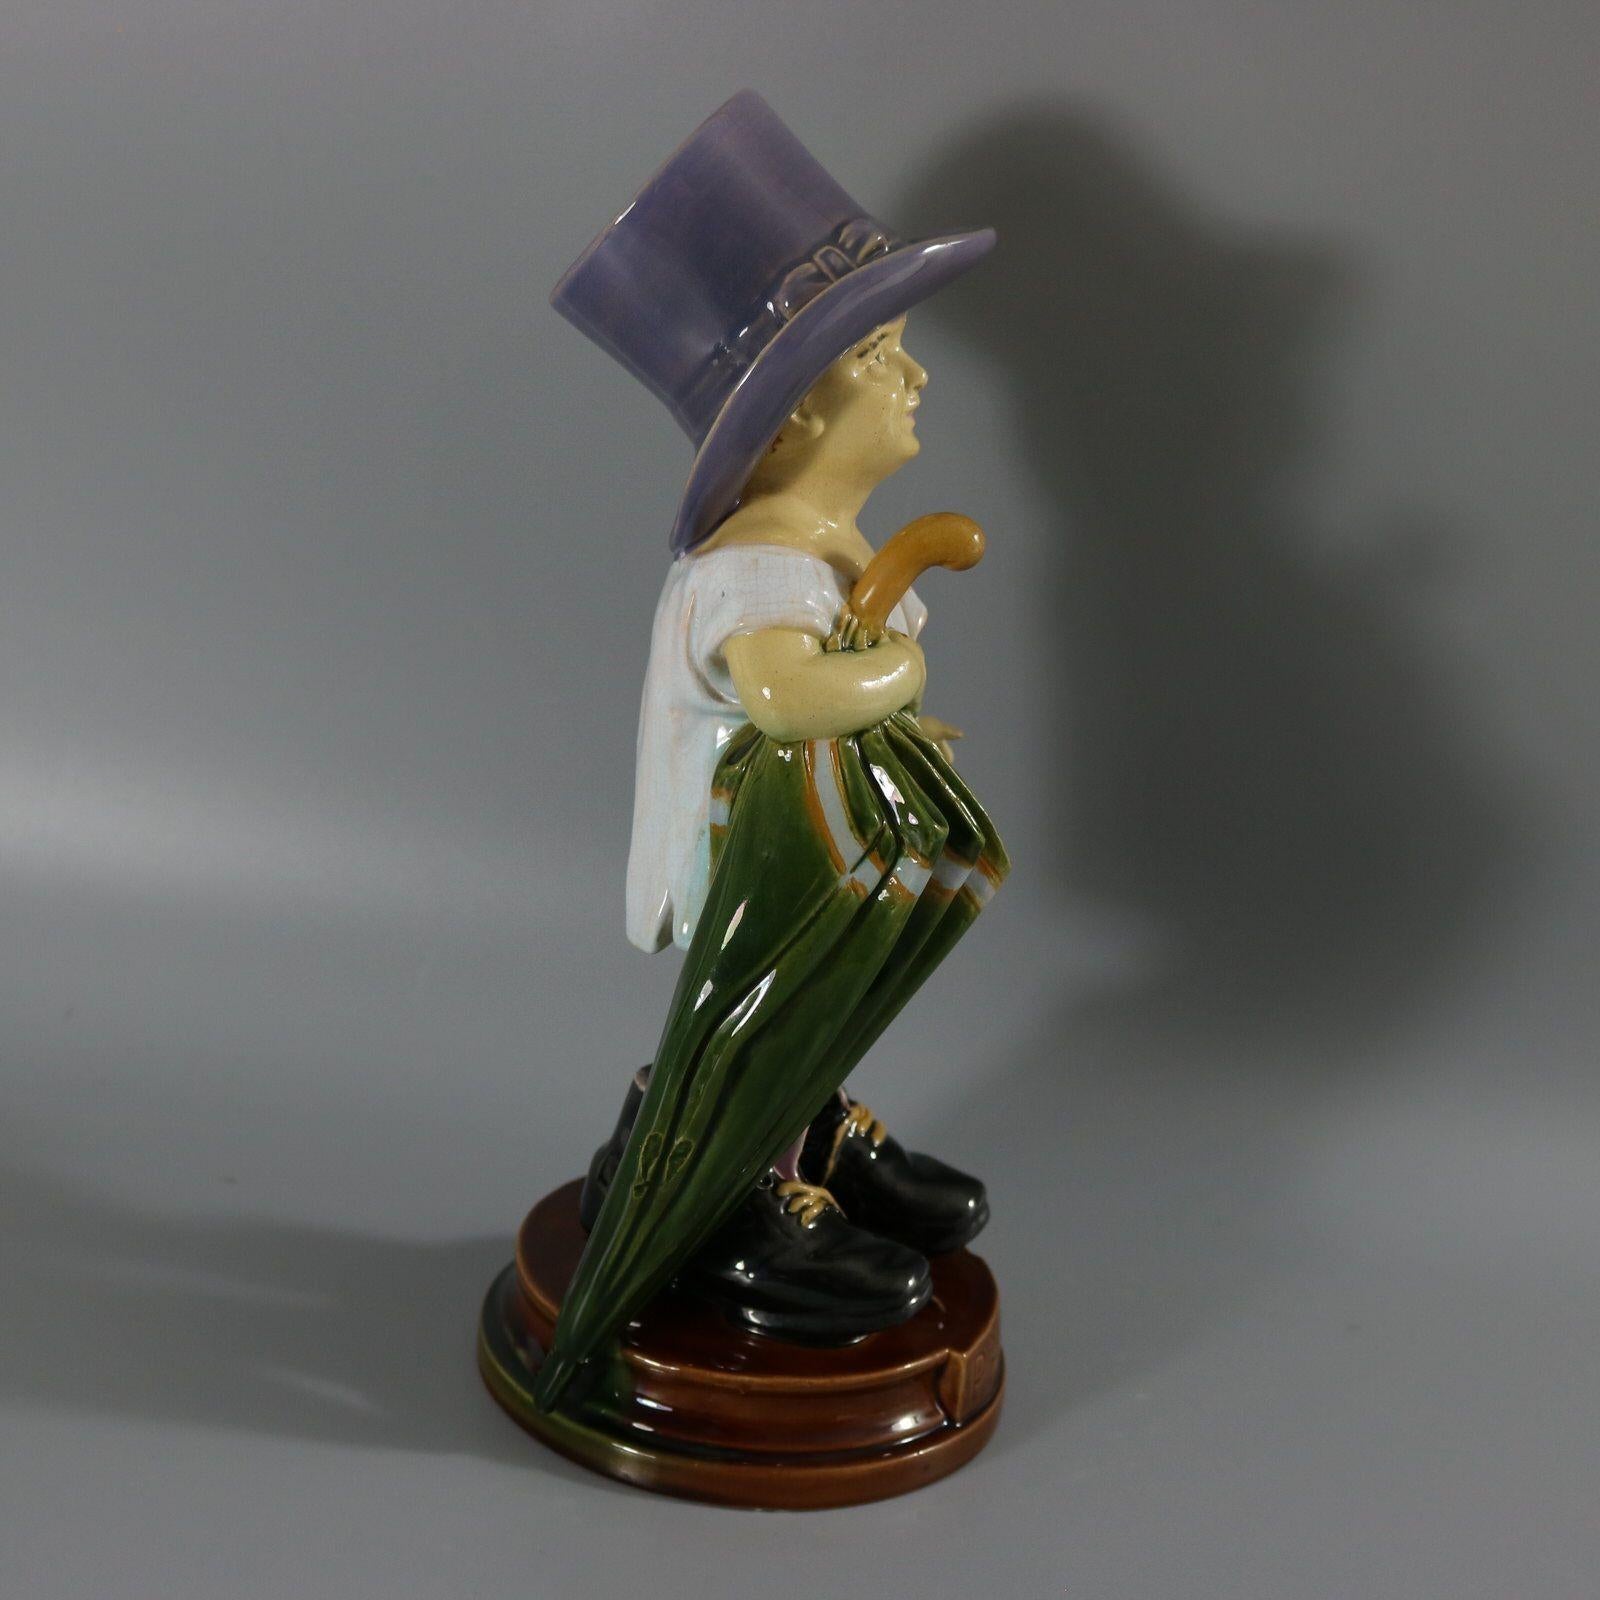 Brownfield Majolica Figure of a Child, Titled PAPA For Sale 3